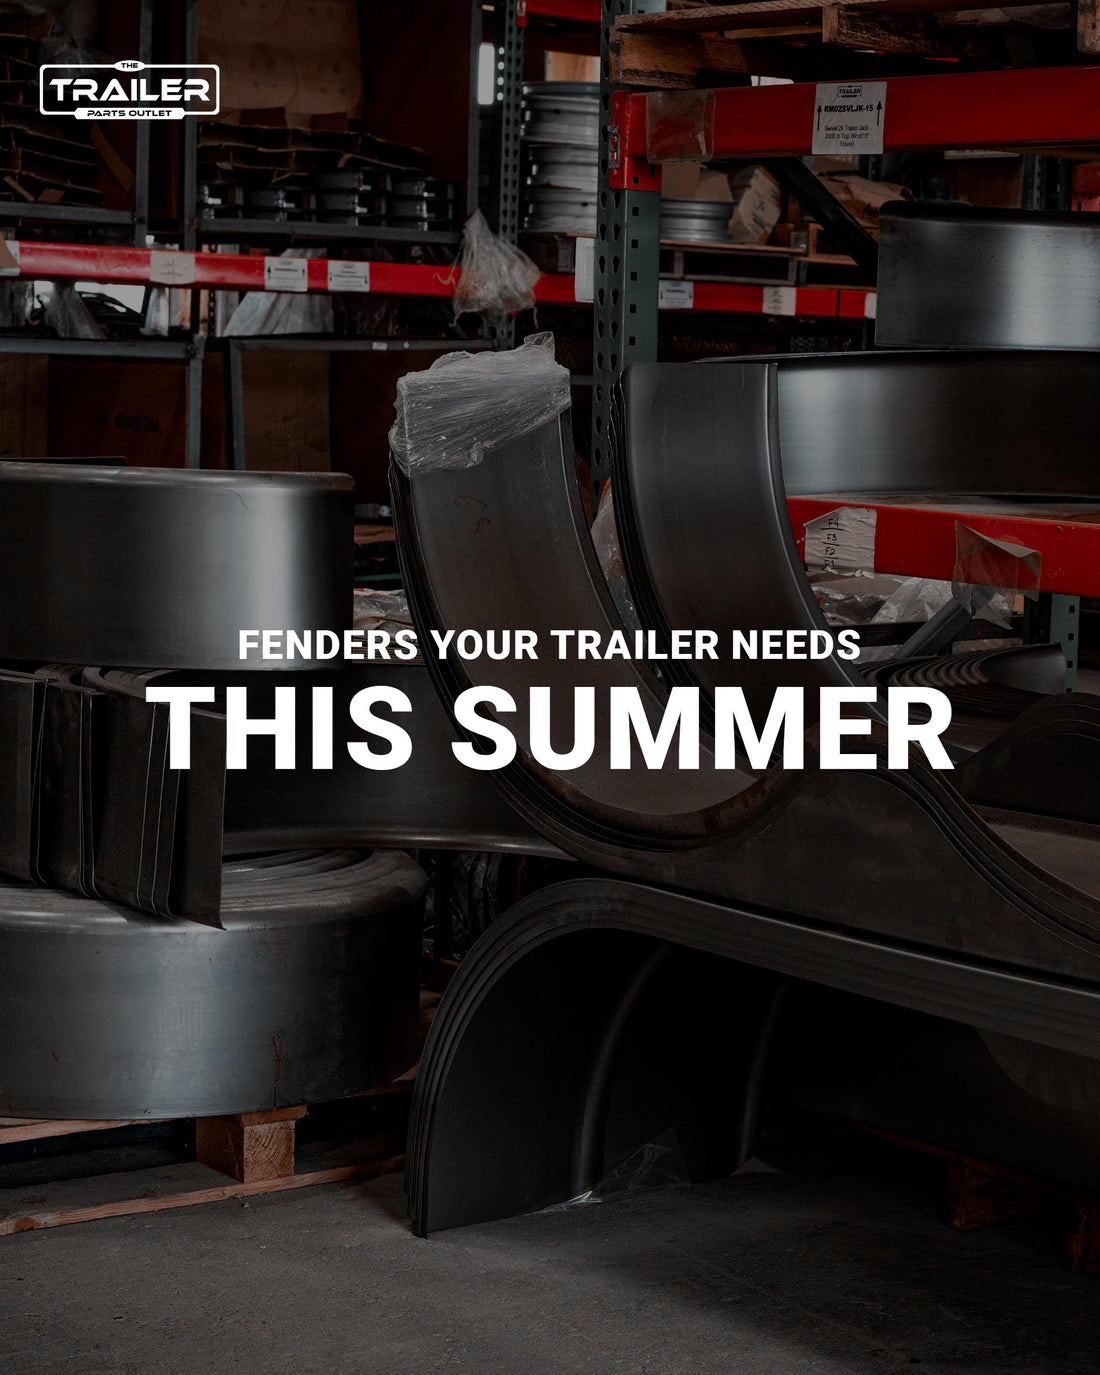 Fenders Your Trailer Needs this Summer